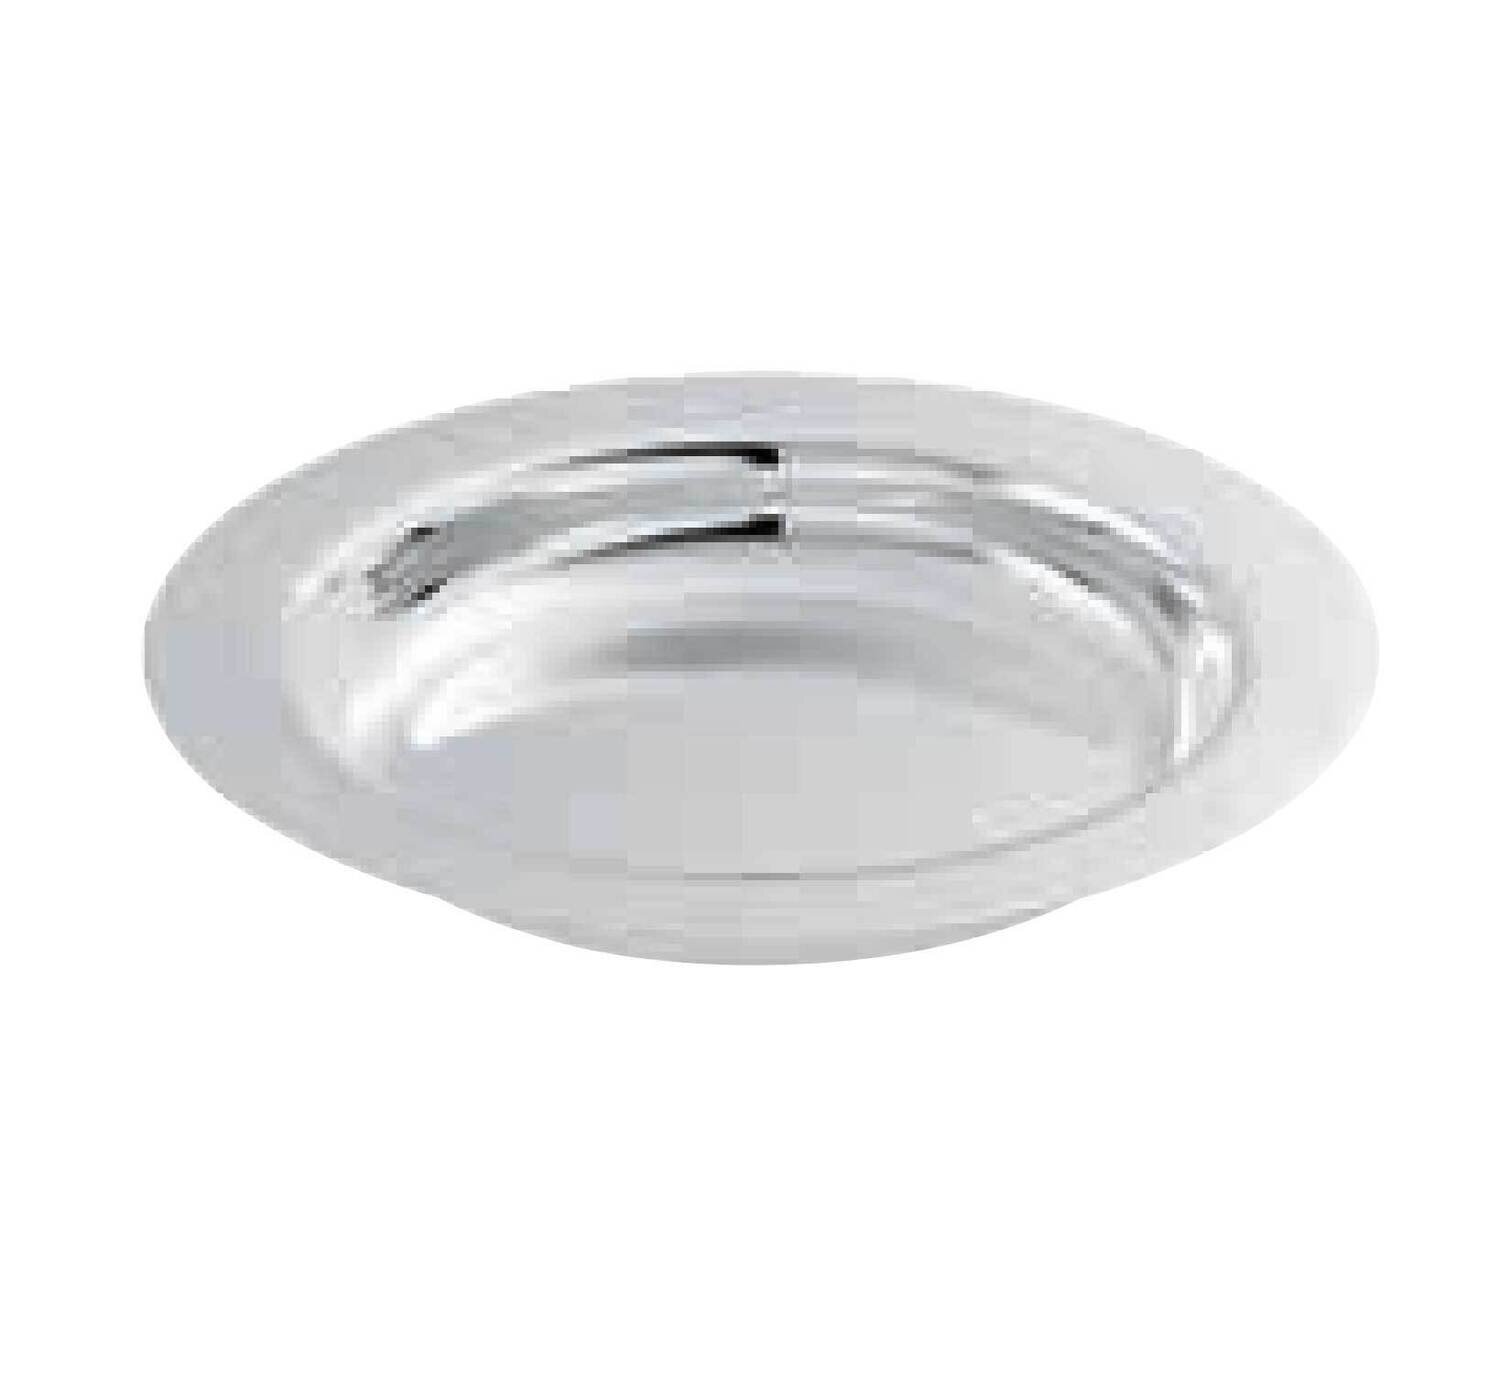 Ercuis Mistral Baby Plate 5.875 Inch Silver Plated F57T610-01